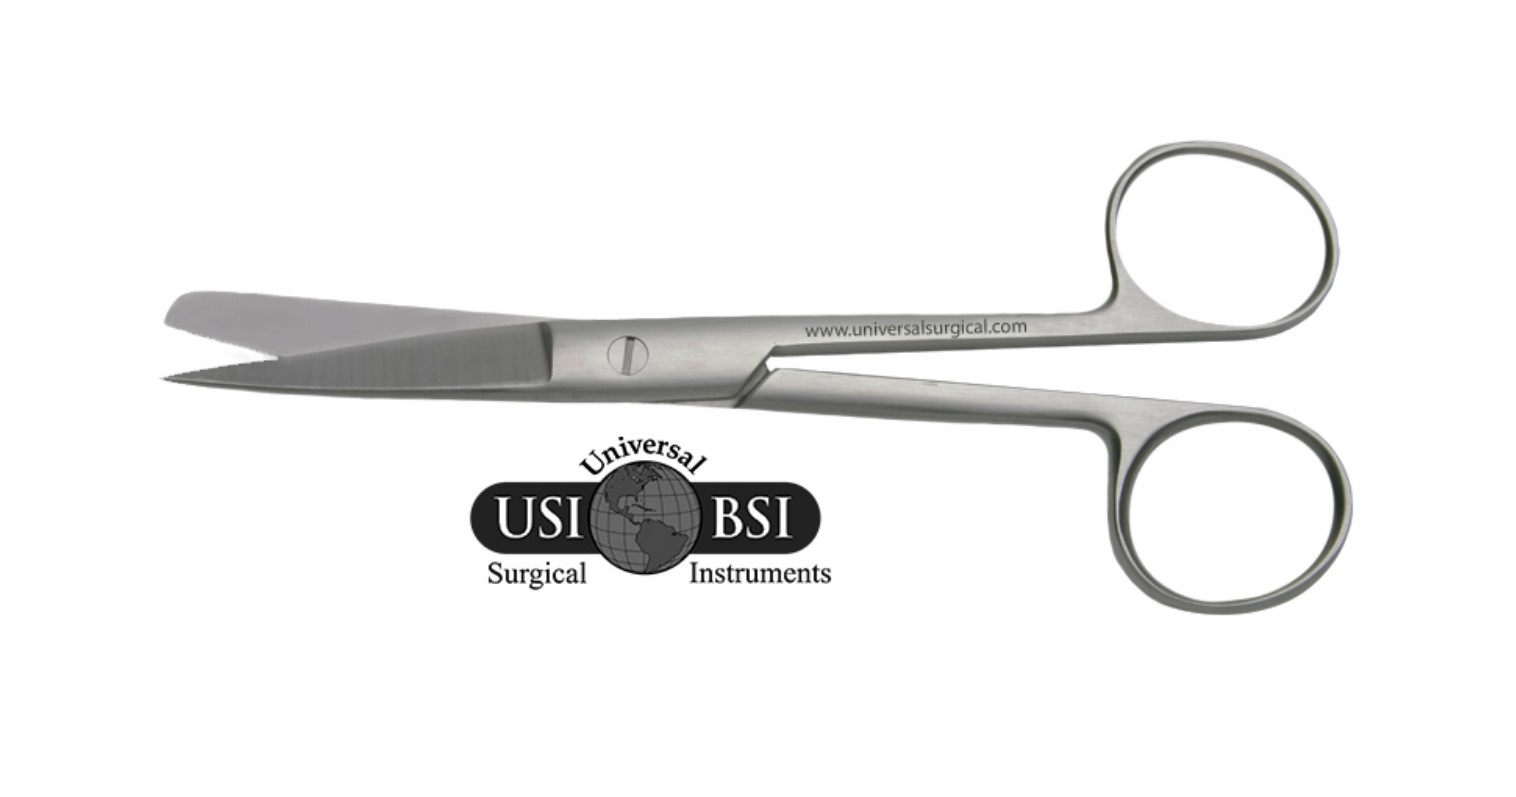 A pair of scissors with the logo for surgical instruments.